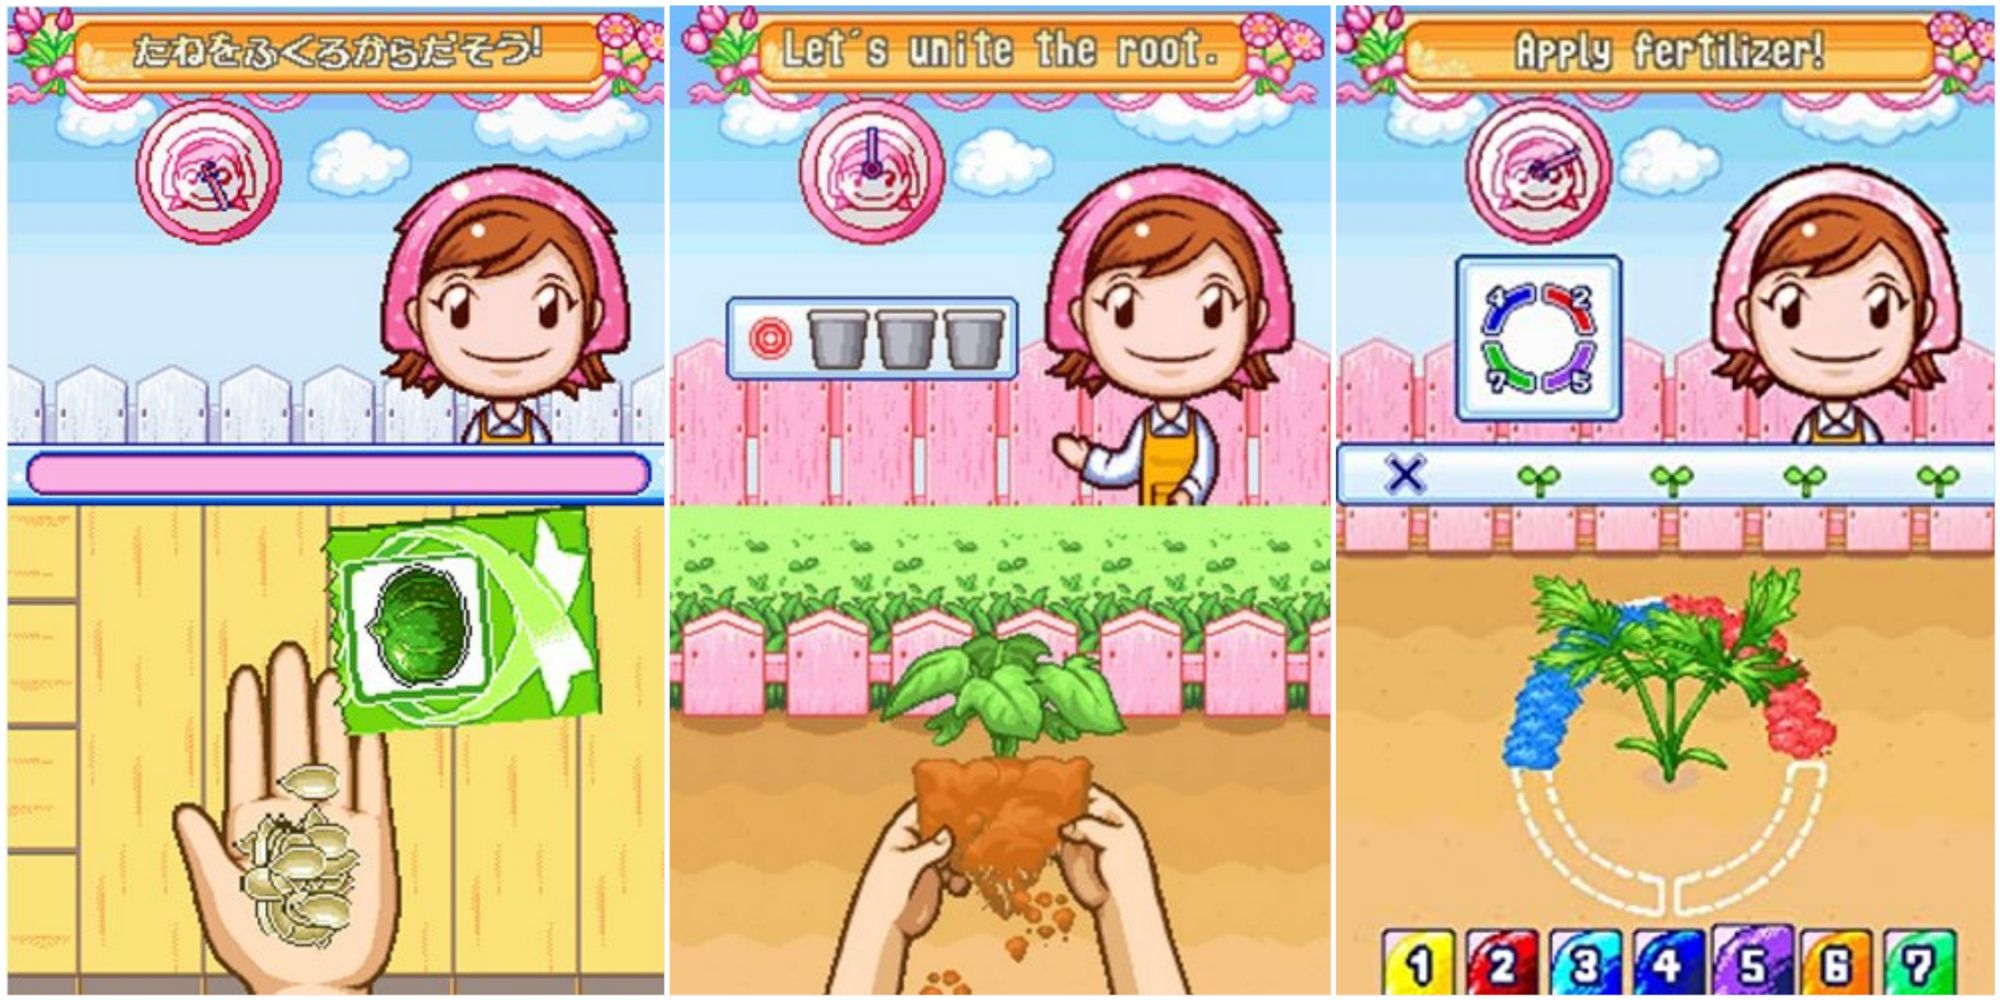 Split image of player pouring seeds in hand, player lifting plant out of soil, and player fertilizing soil